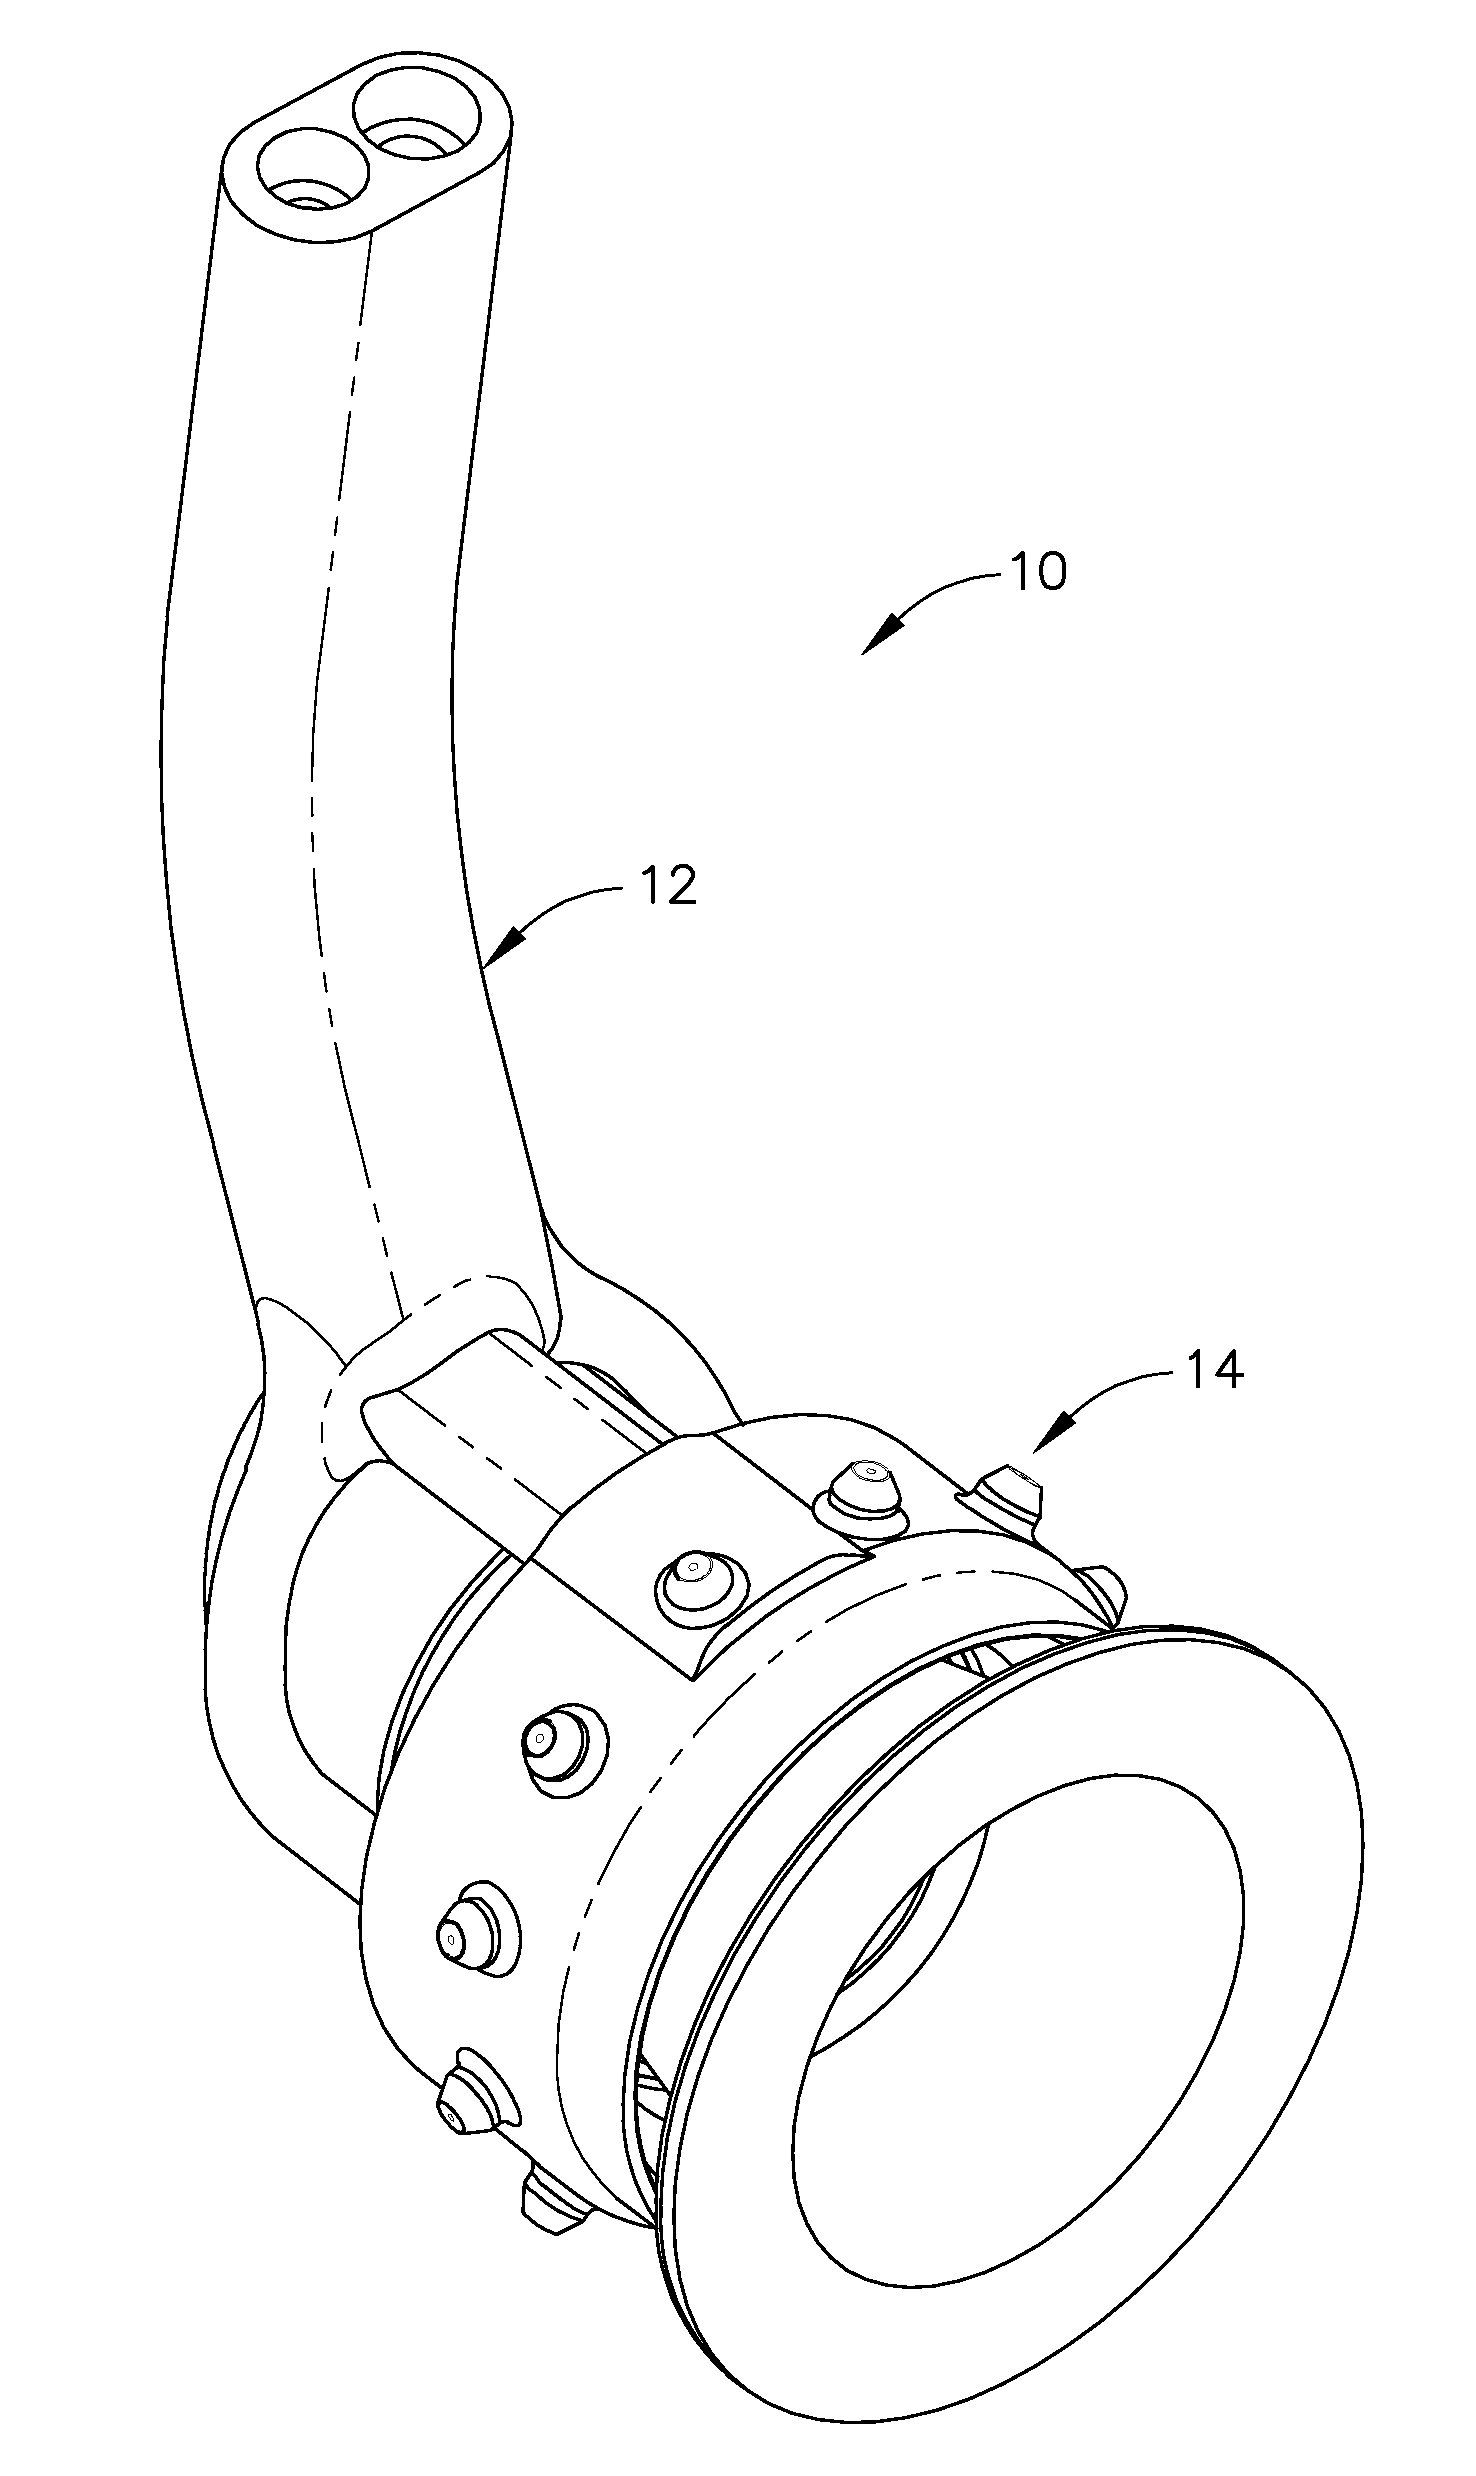 Components capable of transporting liquids manufactured using injection molding